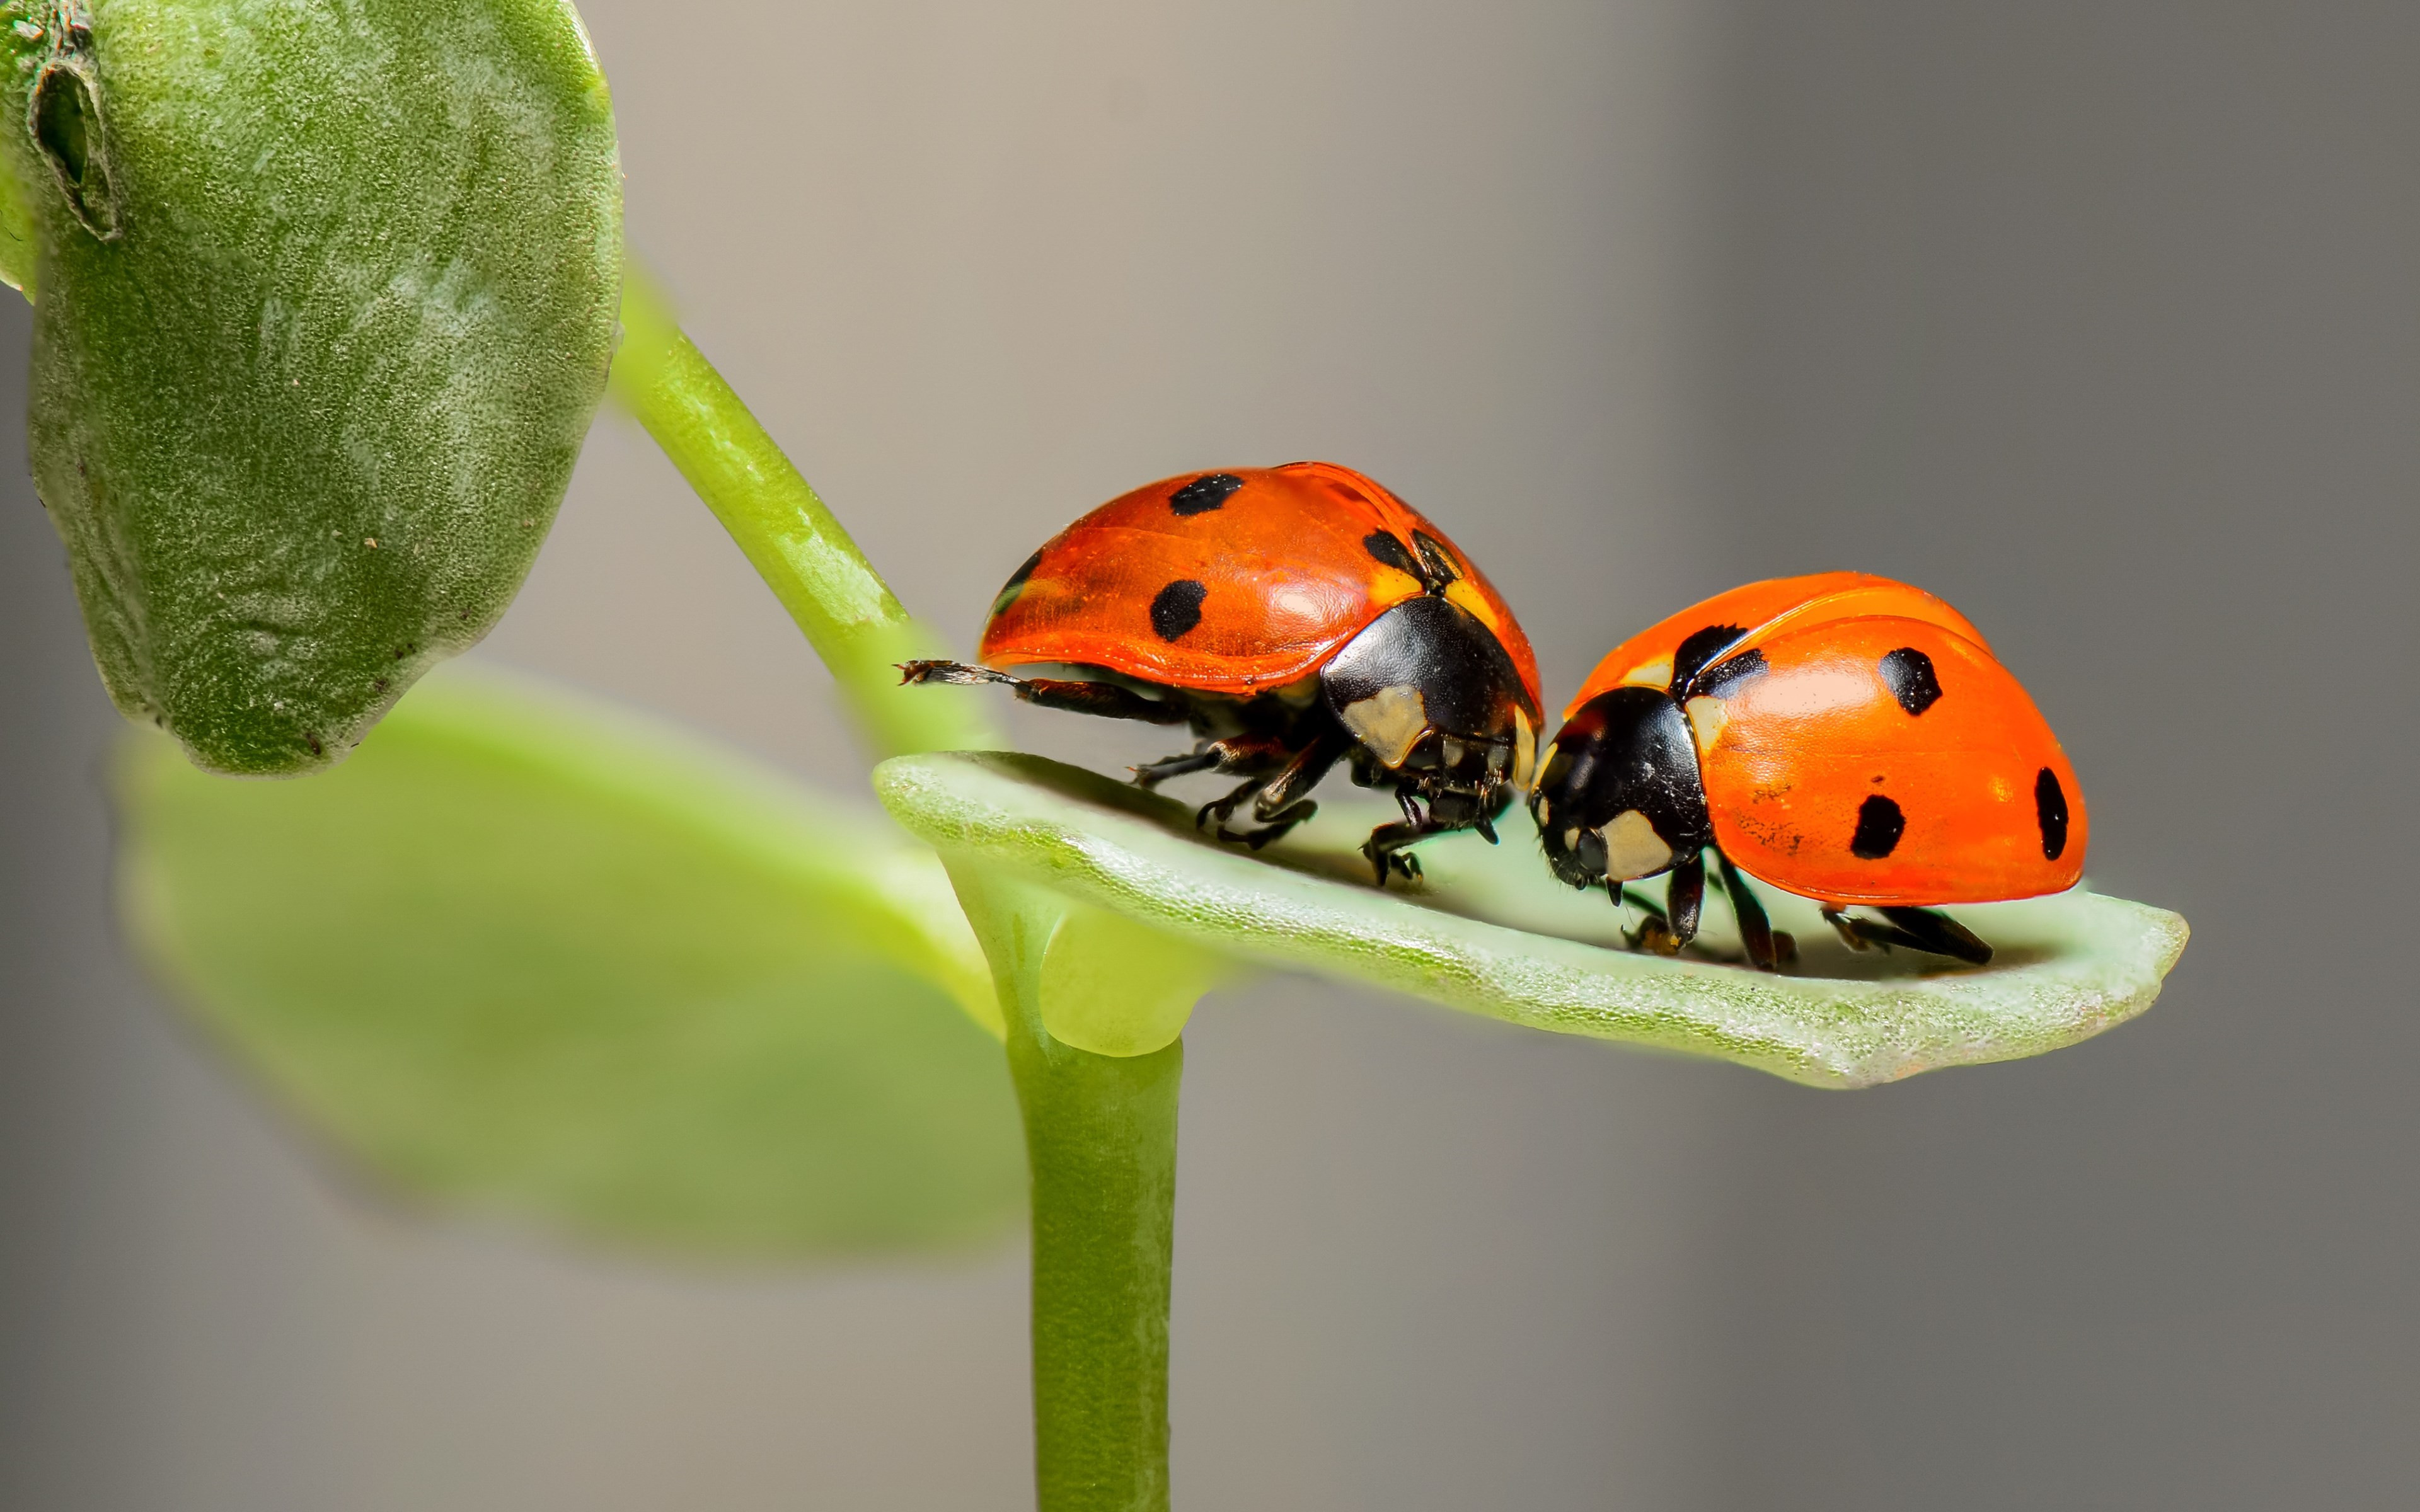 Ladybird, the insect wallpaper 3840x2400